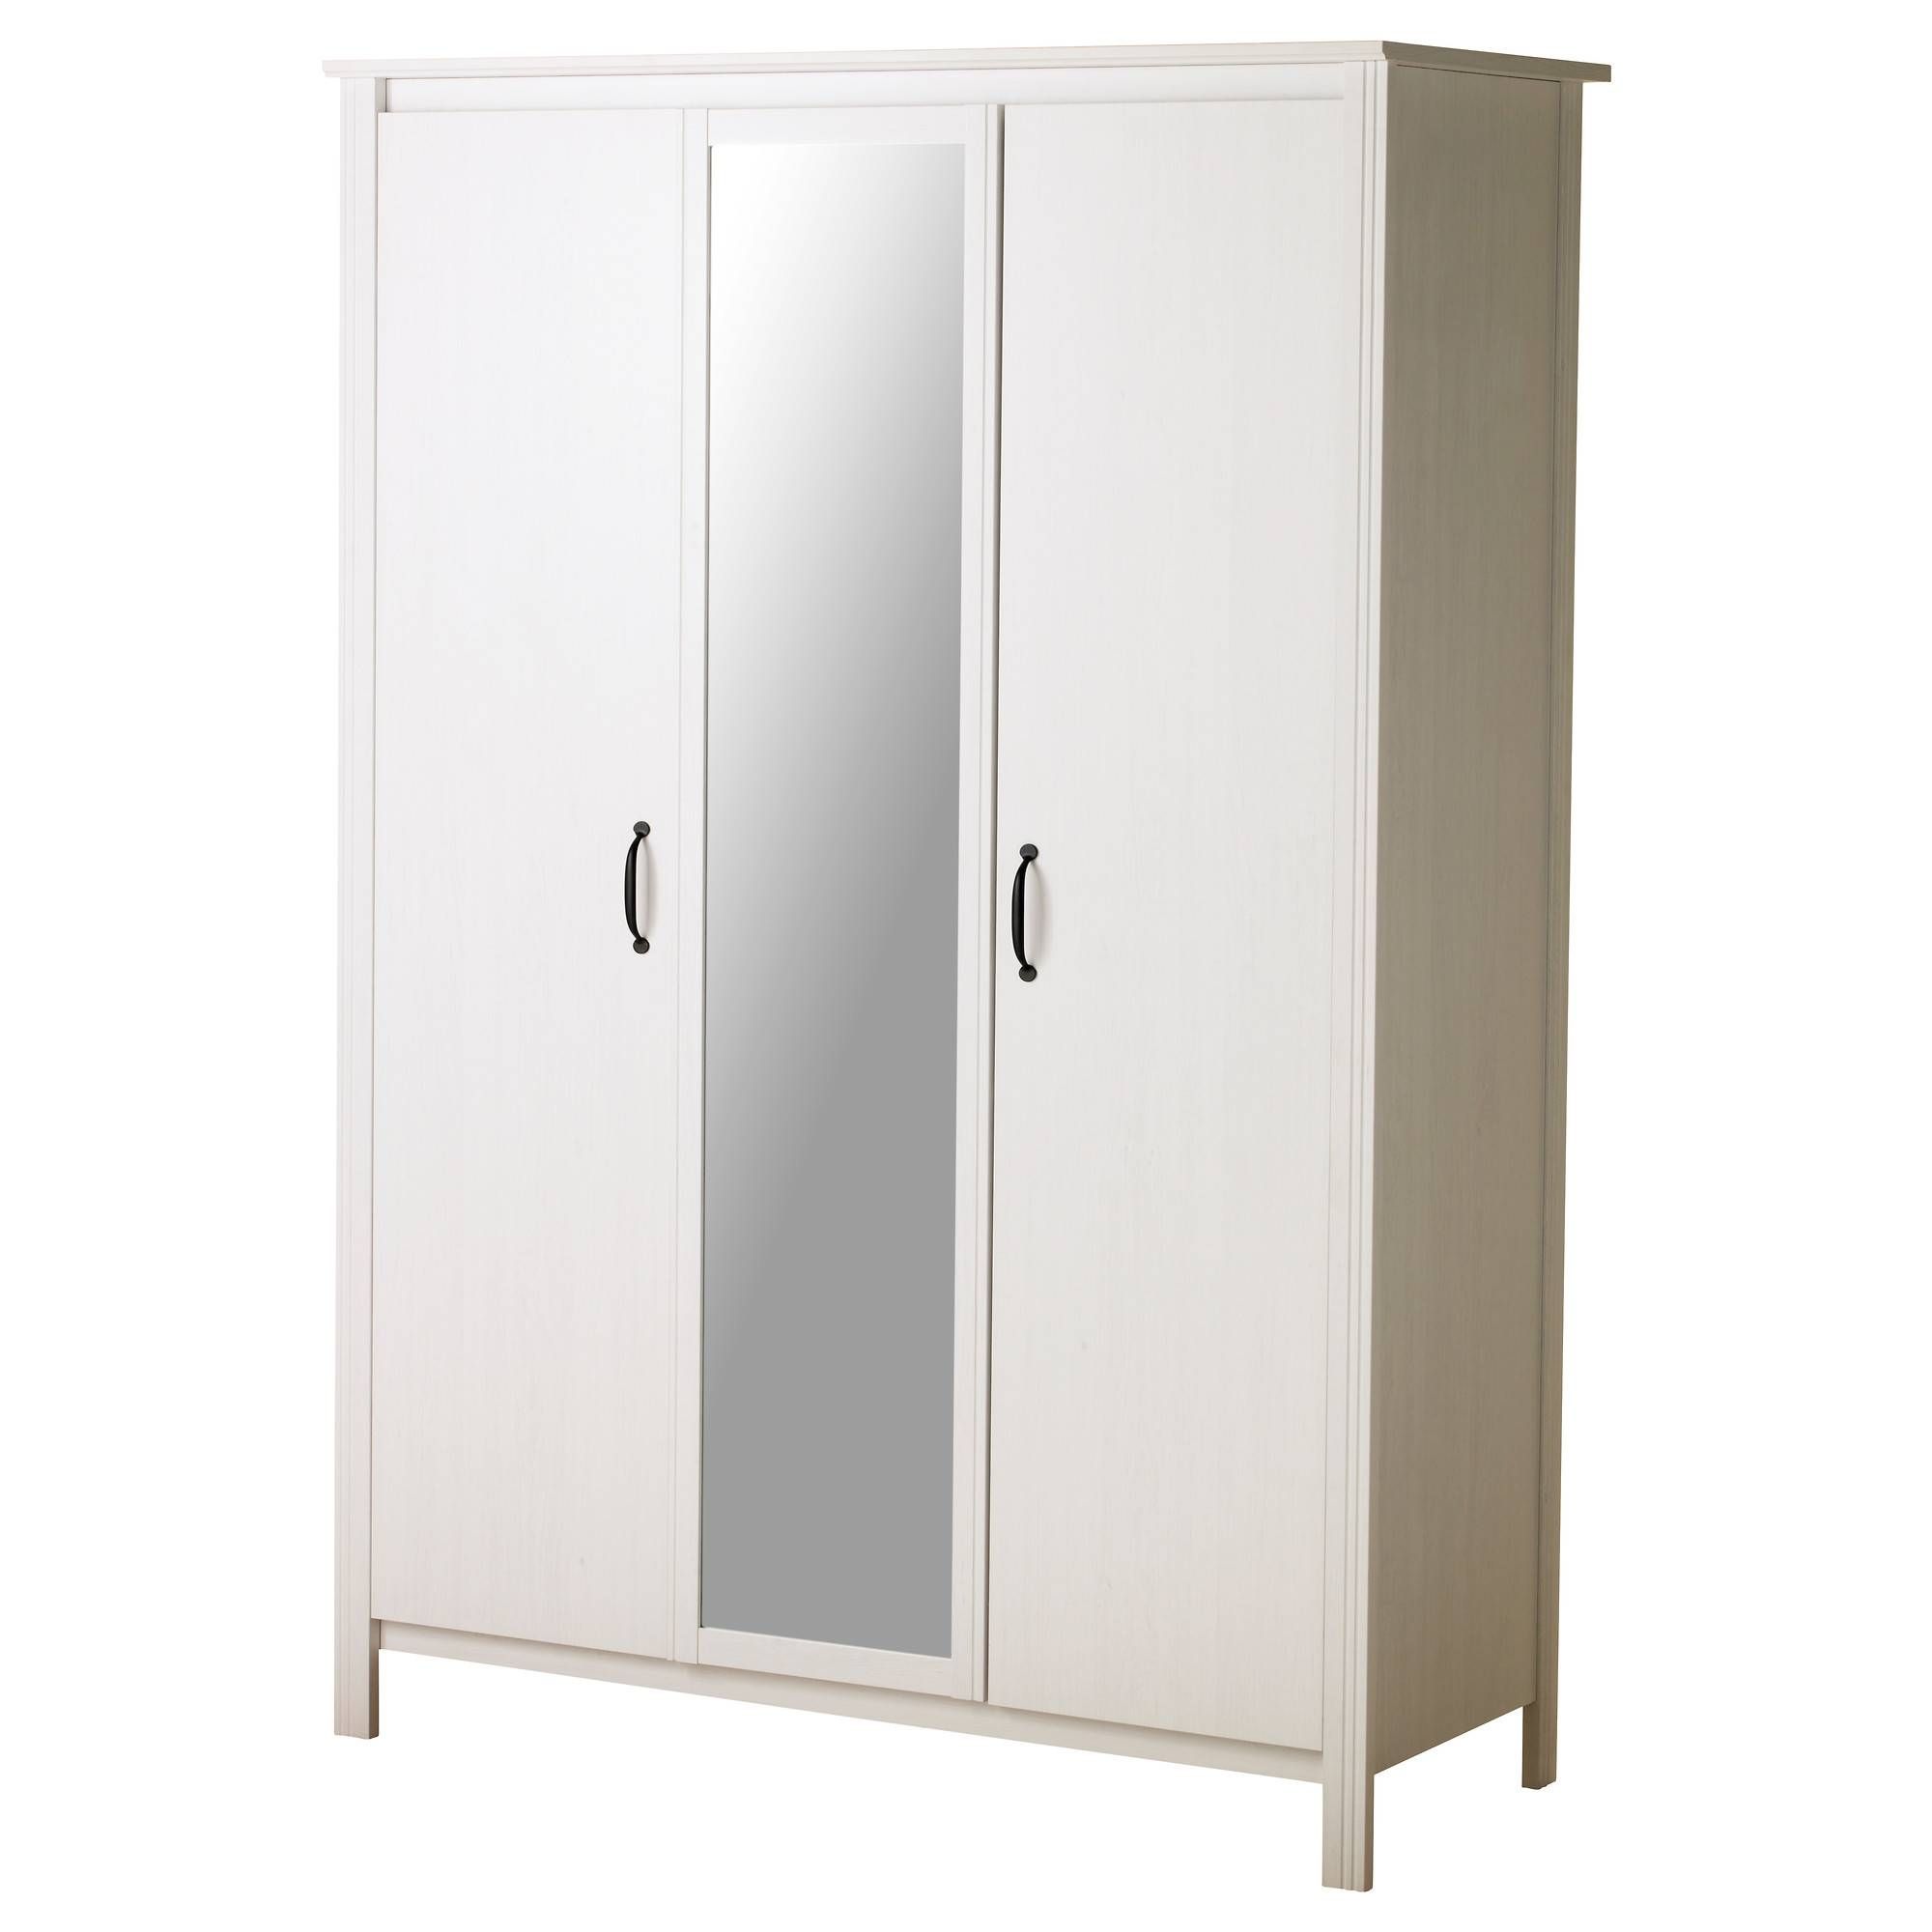 Wardrobes | Ikea Within Double Hanging Rail Wardrobes (View 24 of 30)